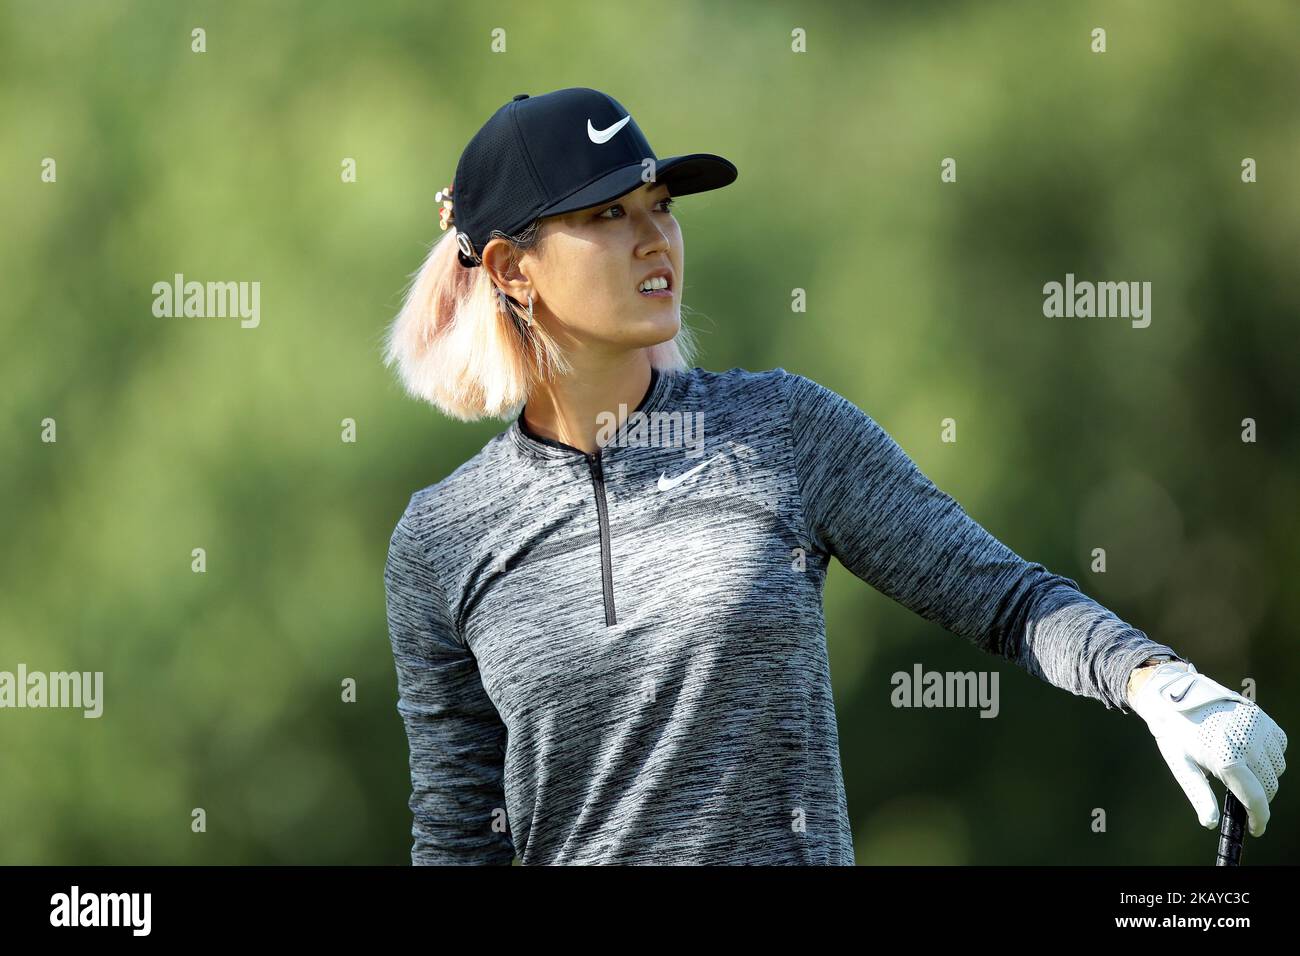 Michelle Wie of the United States tees off on the 5th during the second round of the Meijer LPGA Classic golf tournament at Blythefield Country Club in Belmont, MI, USA Friday, June 15, 2018. (Photo by Jorge Lemus/NurPhoto) Stock Photo